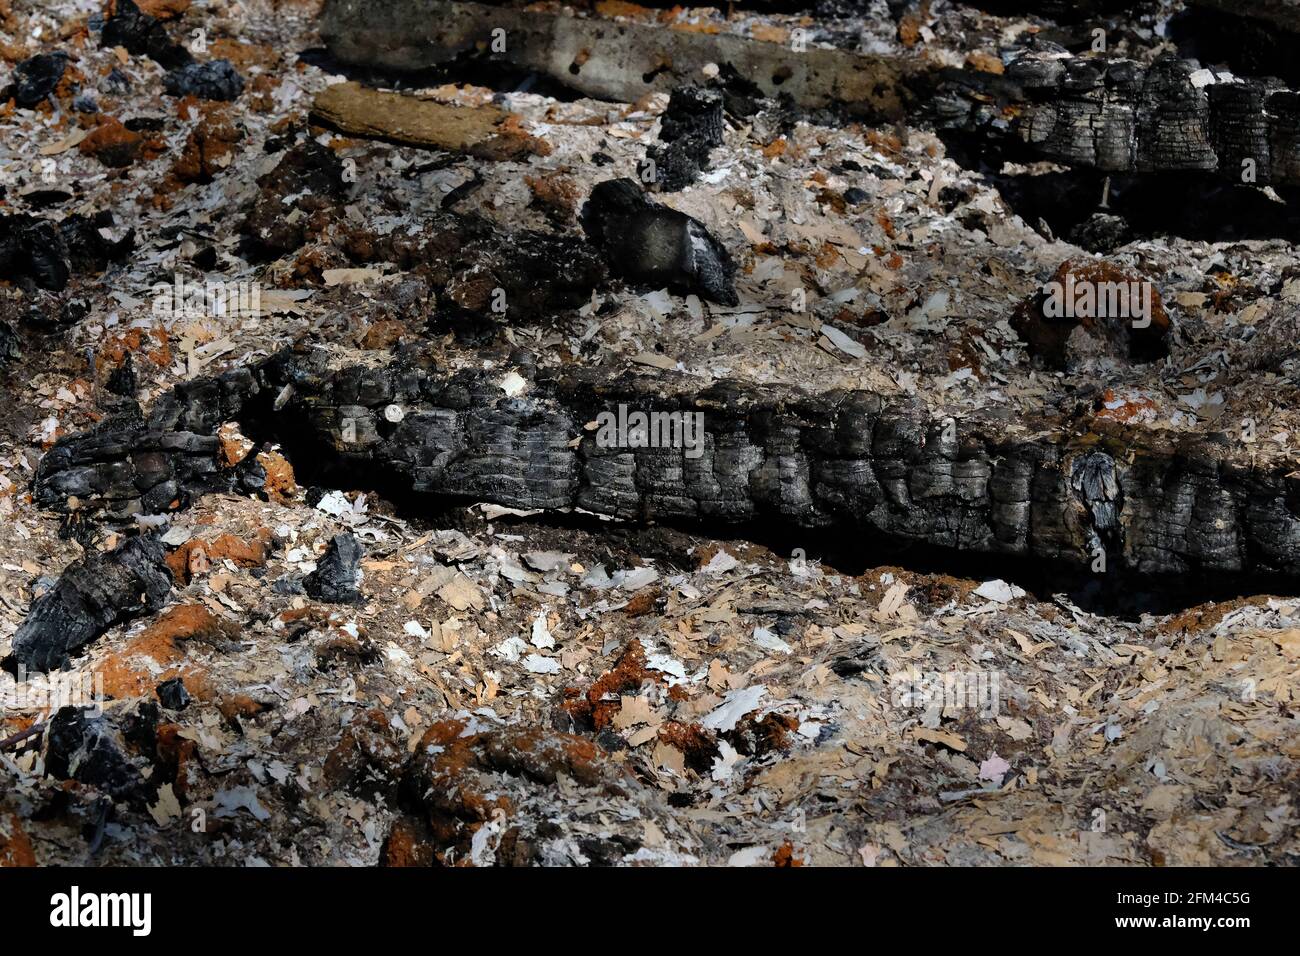 Burnt wood and ash after catastrophic fire in wooden garden building. Stock Photo